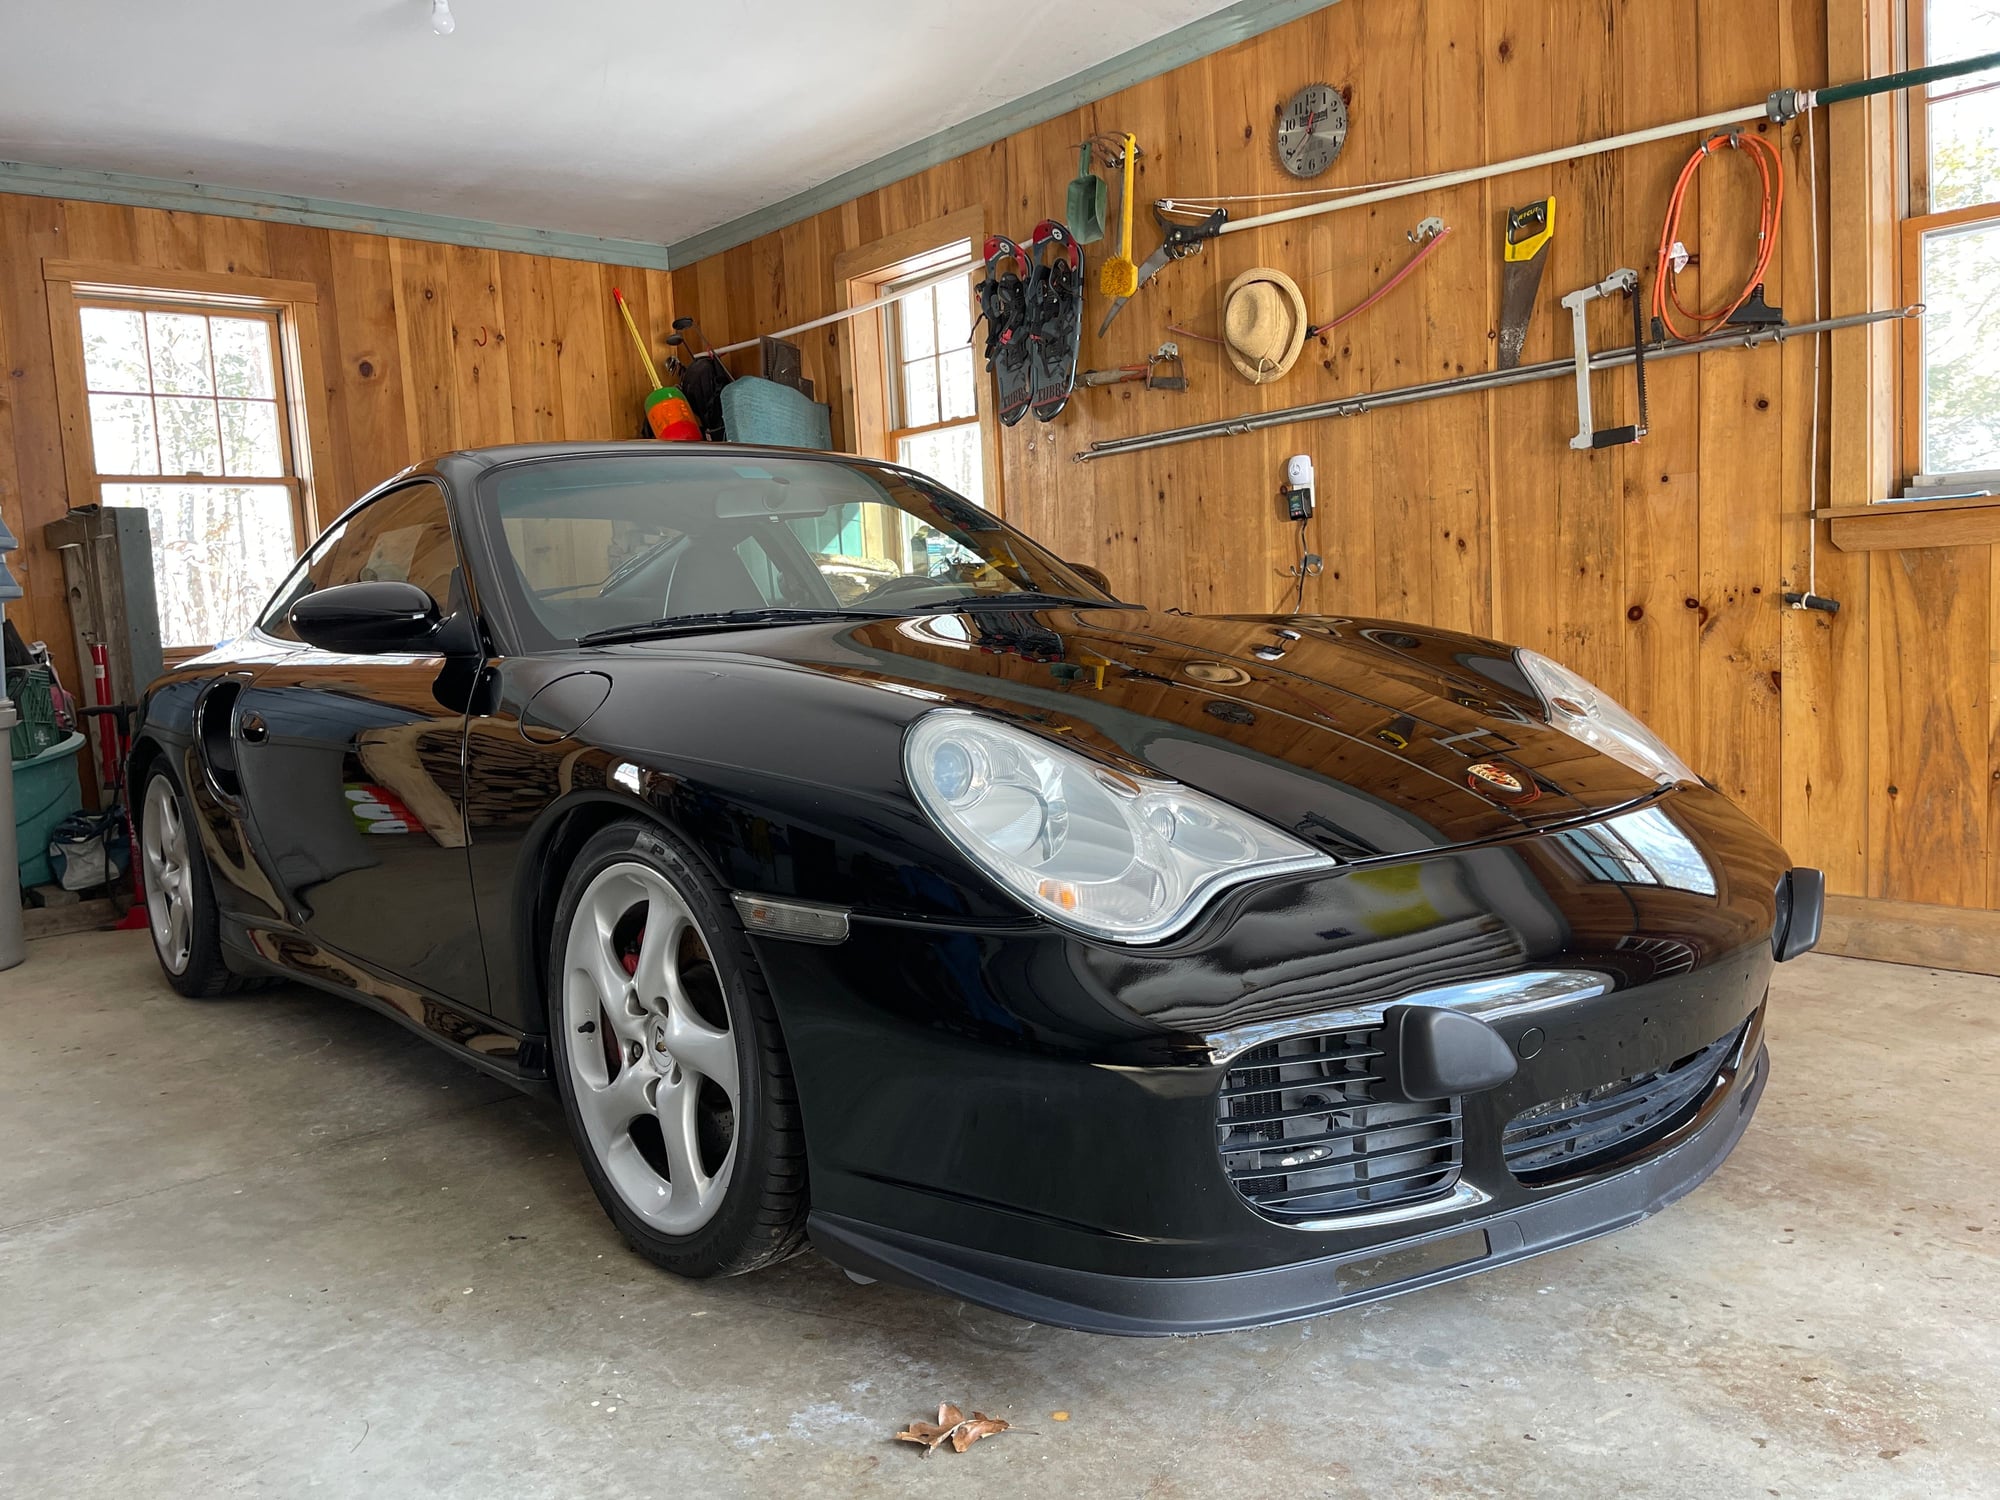 2001 Porsche 911 - 2001 Porsche 911 TT 996 Twin Turbo 6 Speed Manual in Maine - Used - VIN WP0AB29971S685079 - 78,000 Miles - 6 cyl - AWD - Manual - Coupe - Black - Brunswick, ME 04011, United States